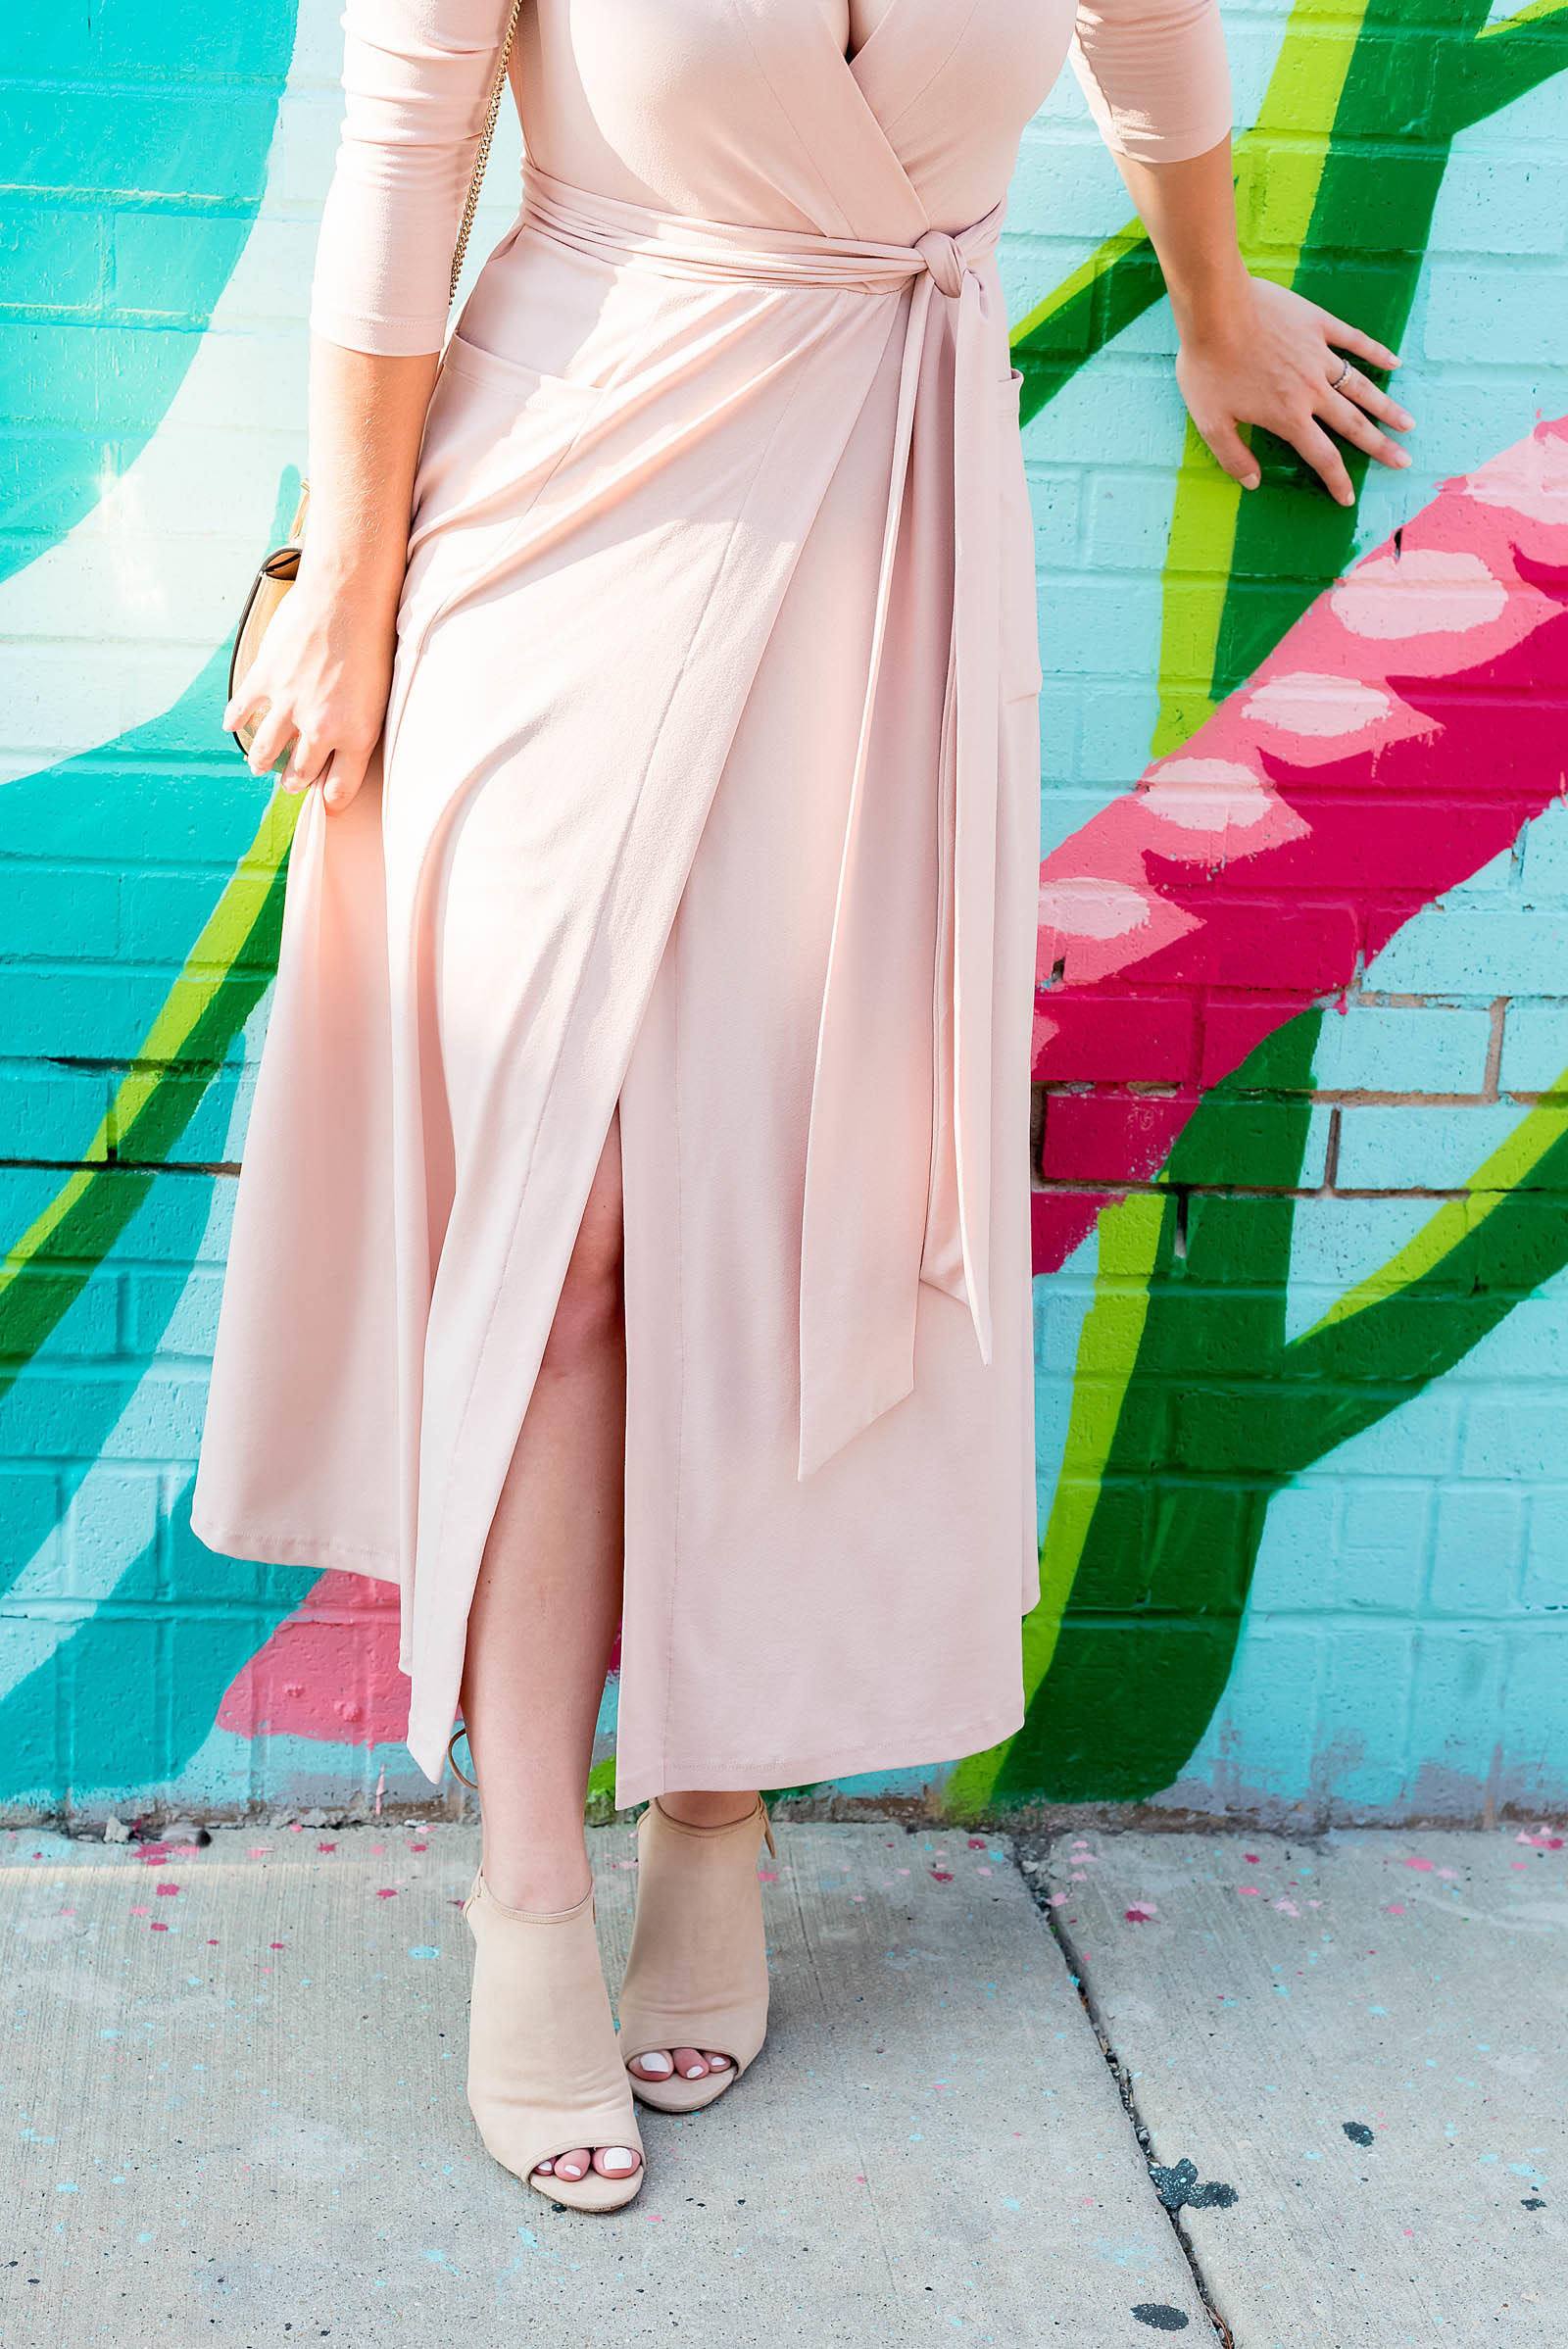 Pink Blush Nude Summer Flamingo Outfit